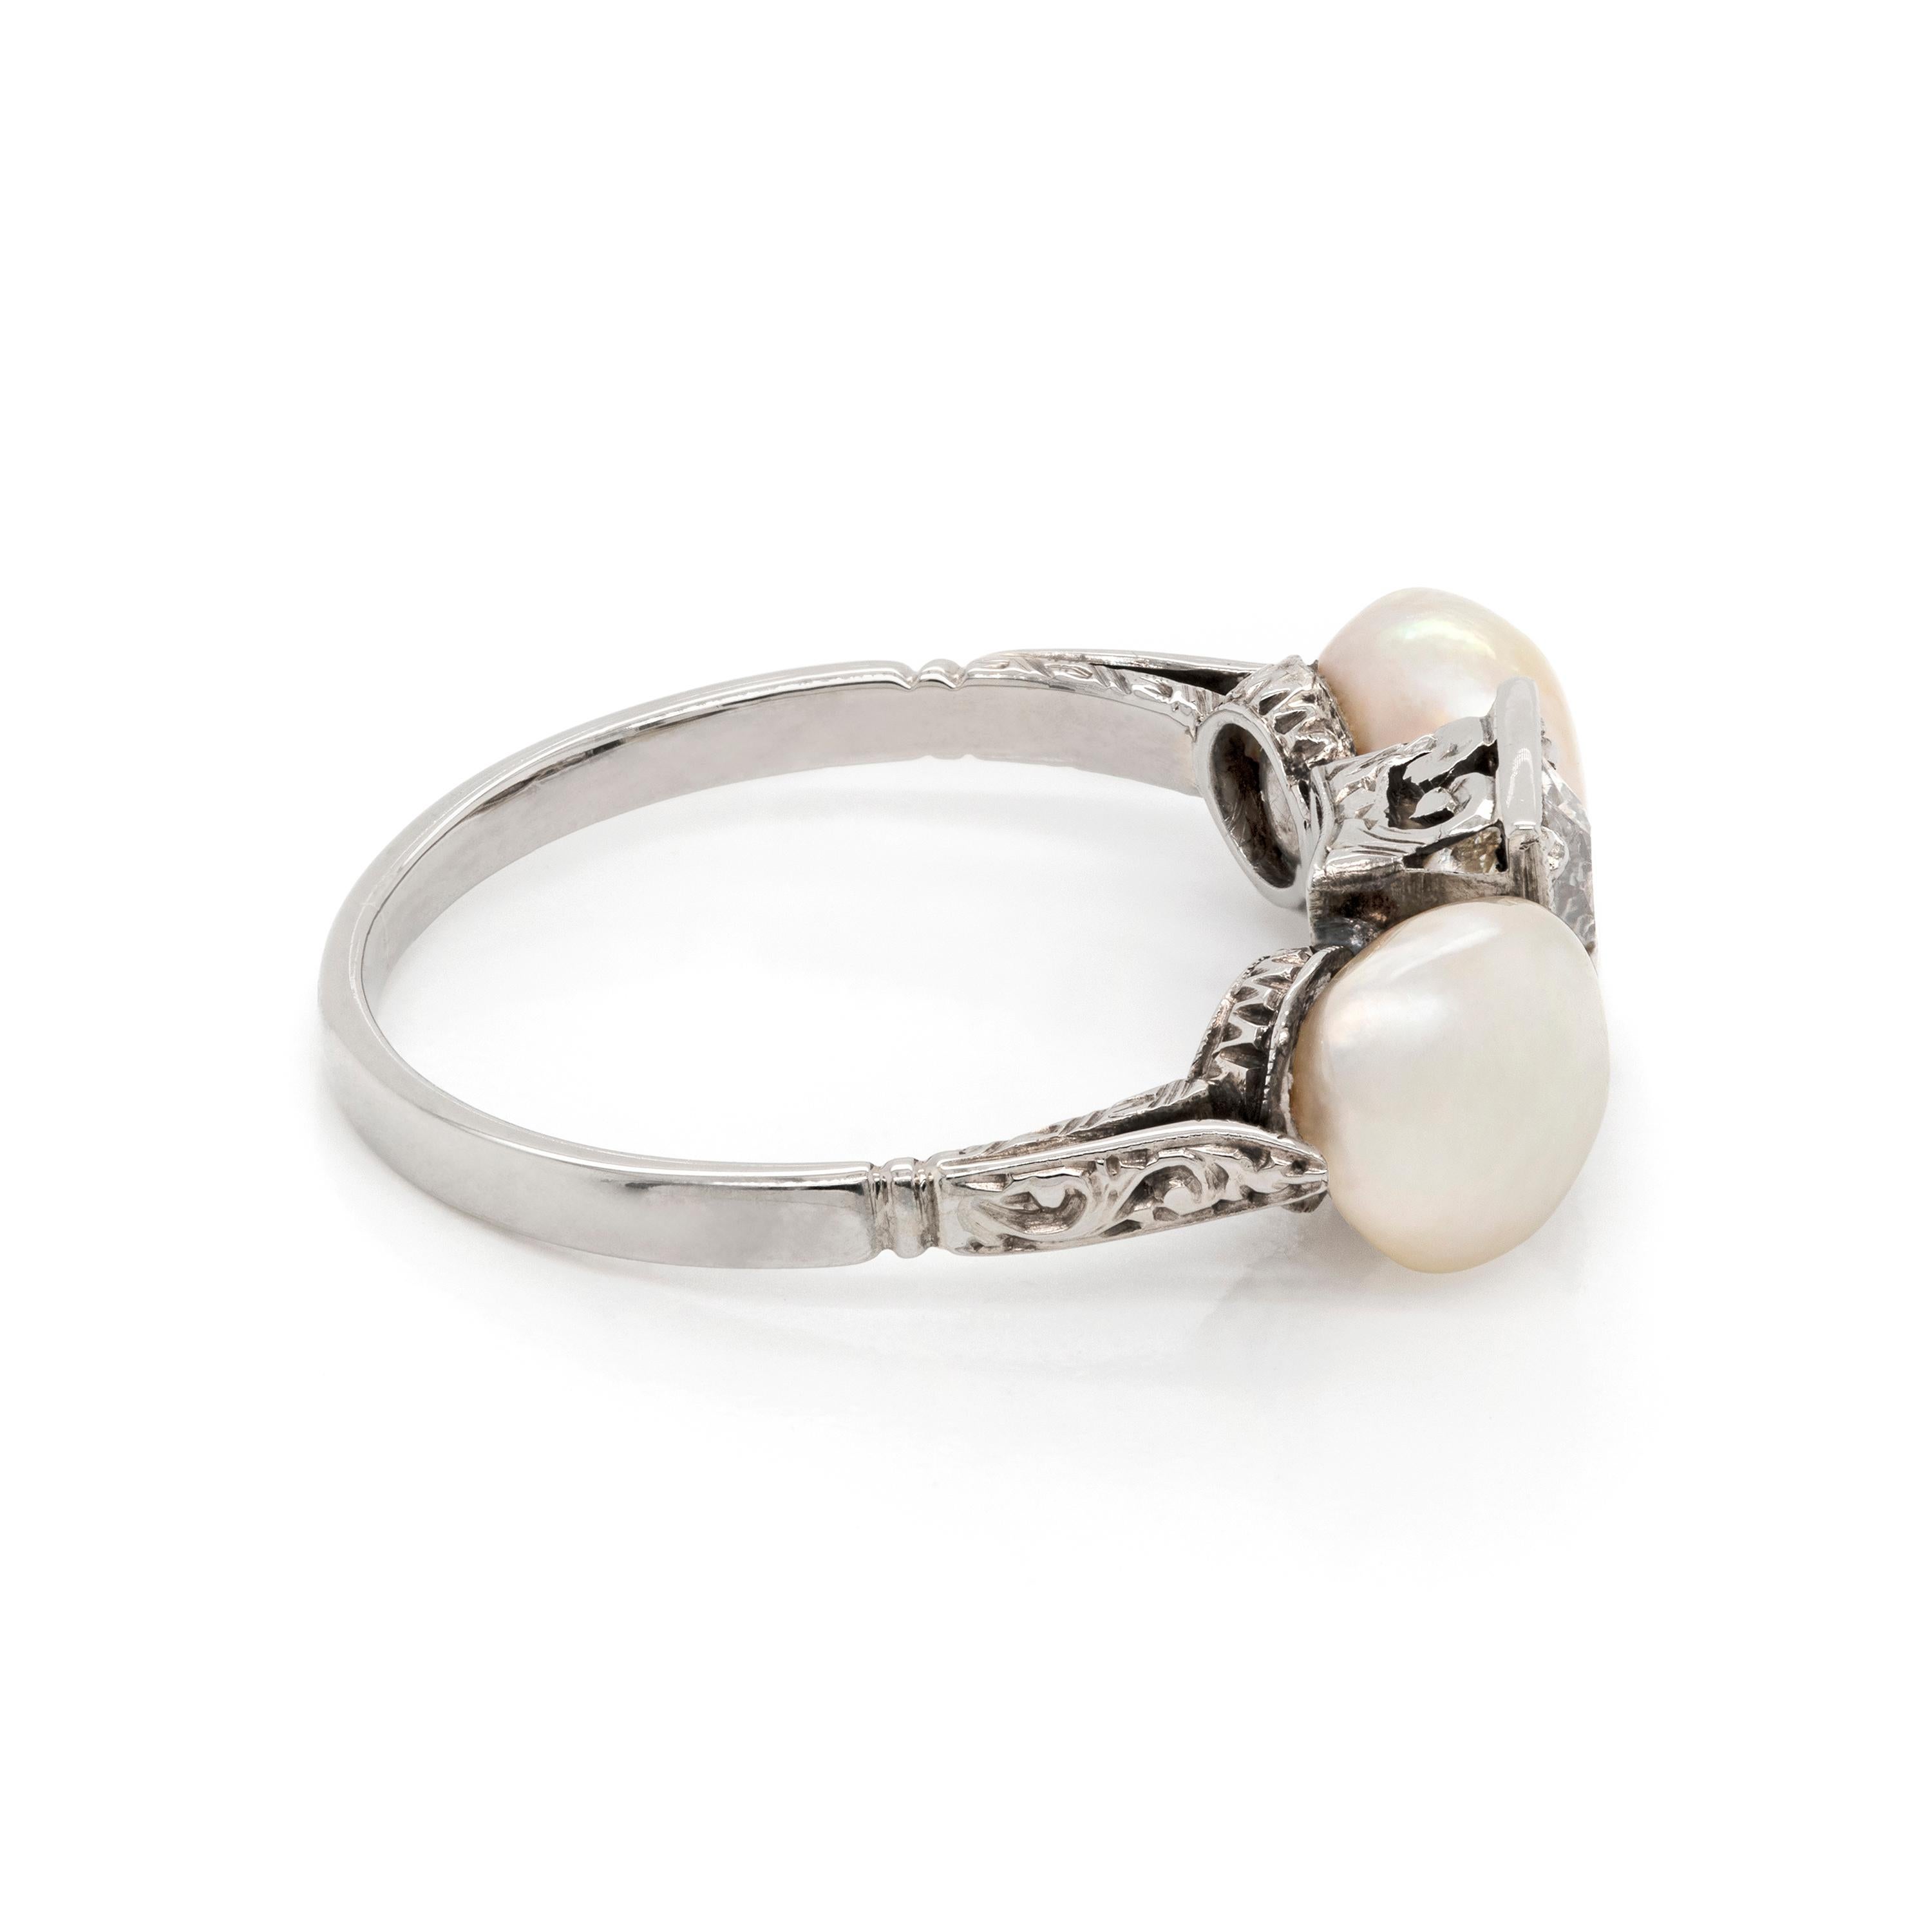 One of a kind Art Deco 18 carat white gold ring featuring two 6.9mm button natural pearls mounted on either side of a beautifully carved square frame measuring 0.65 x 0.65cm, atop a fine leaf detailed shank. A claw set old European cut diamond,